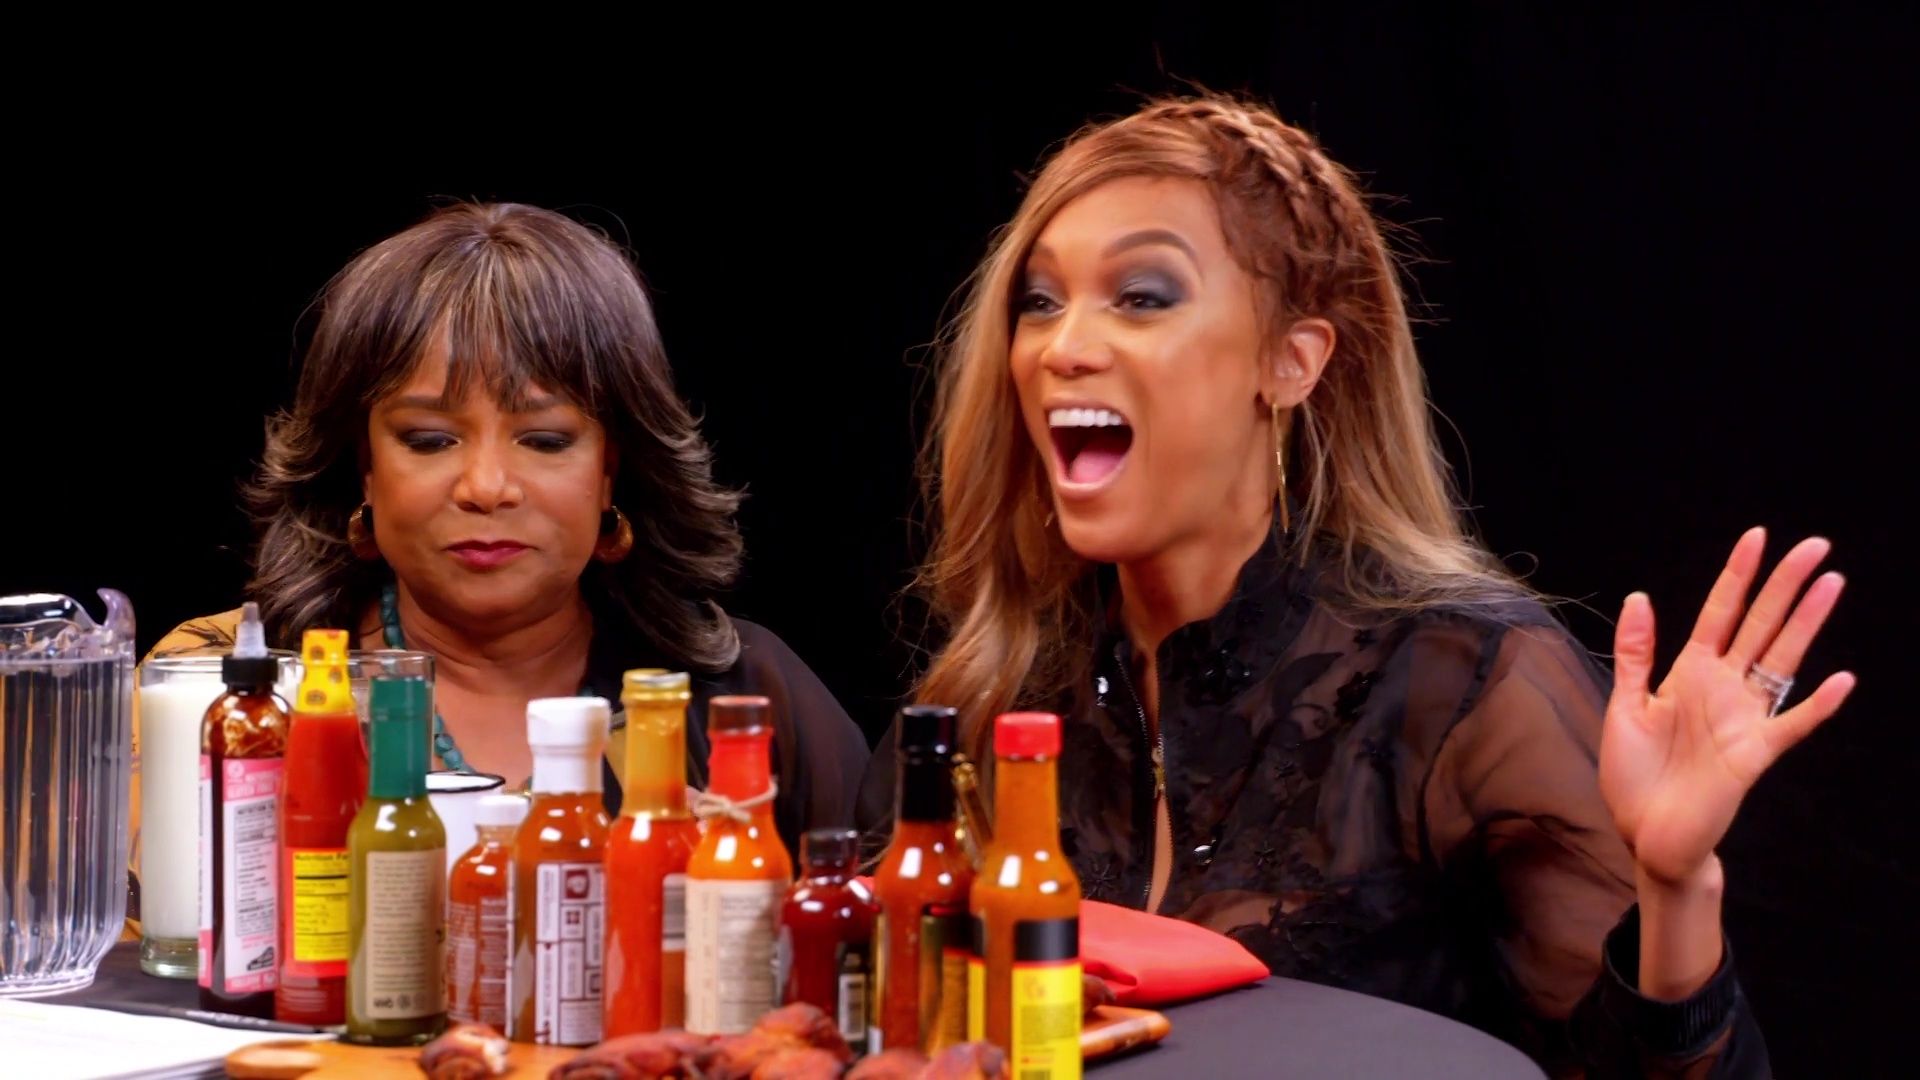 Tyra Banks Cries for Her Mom While Eating Spicy Wings